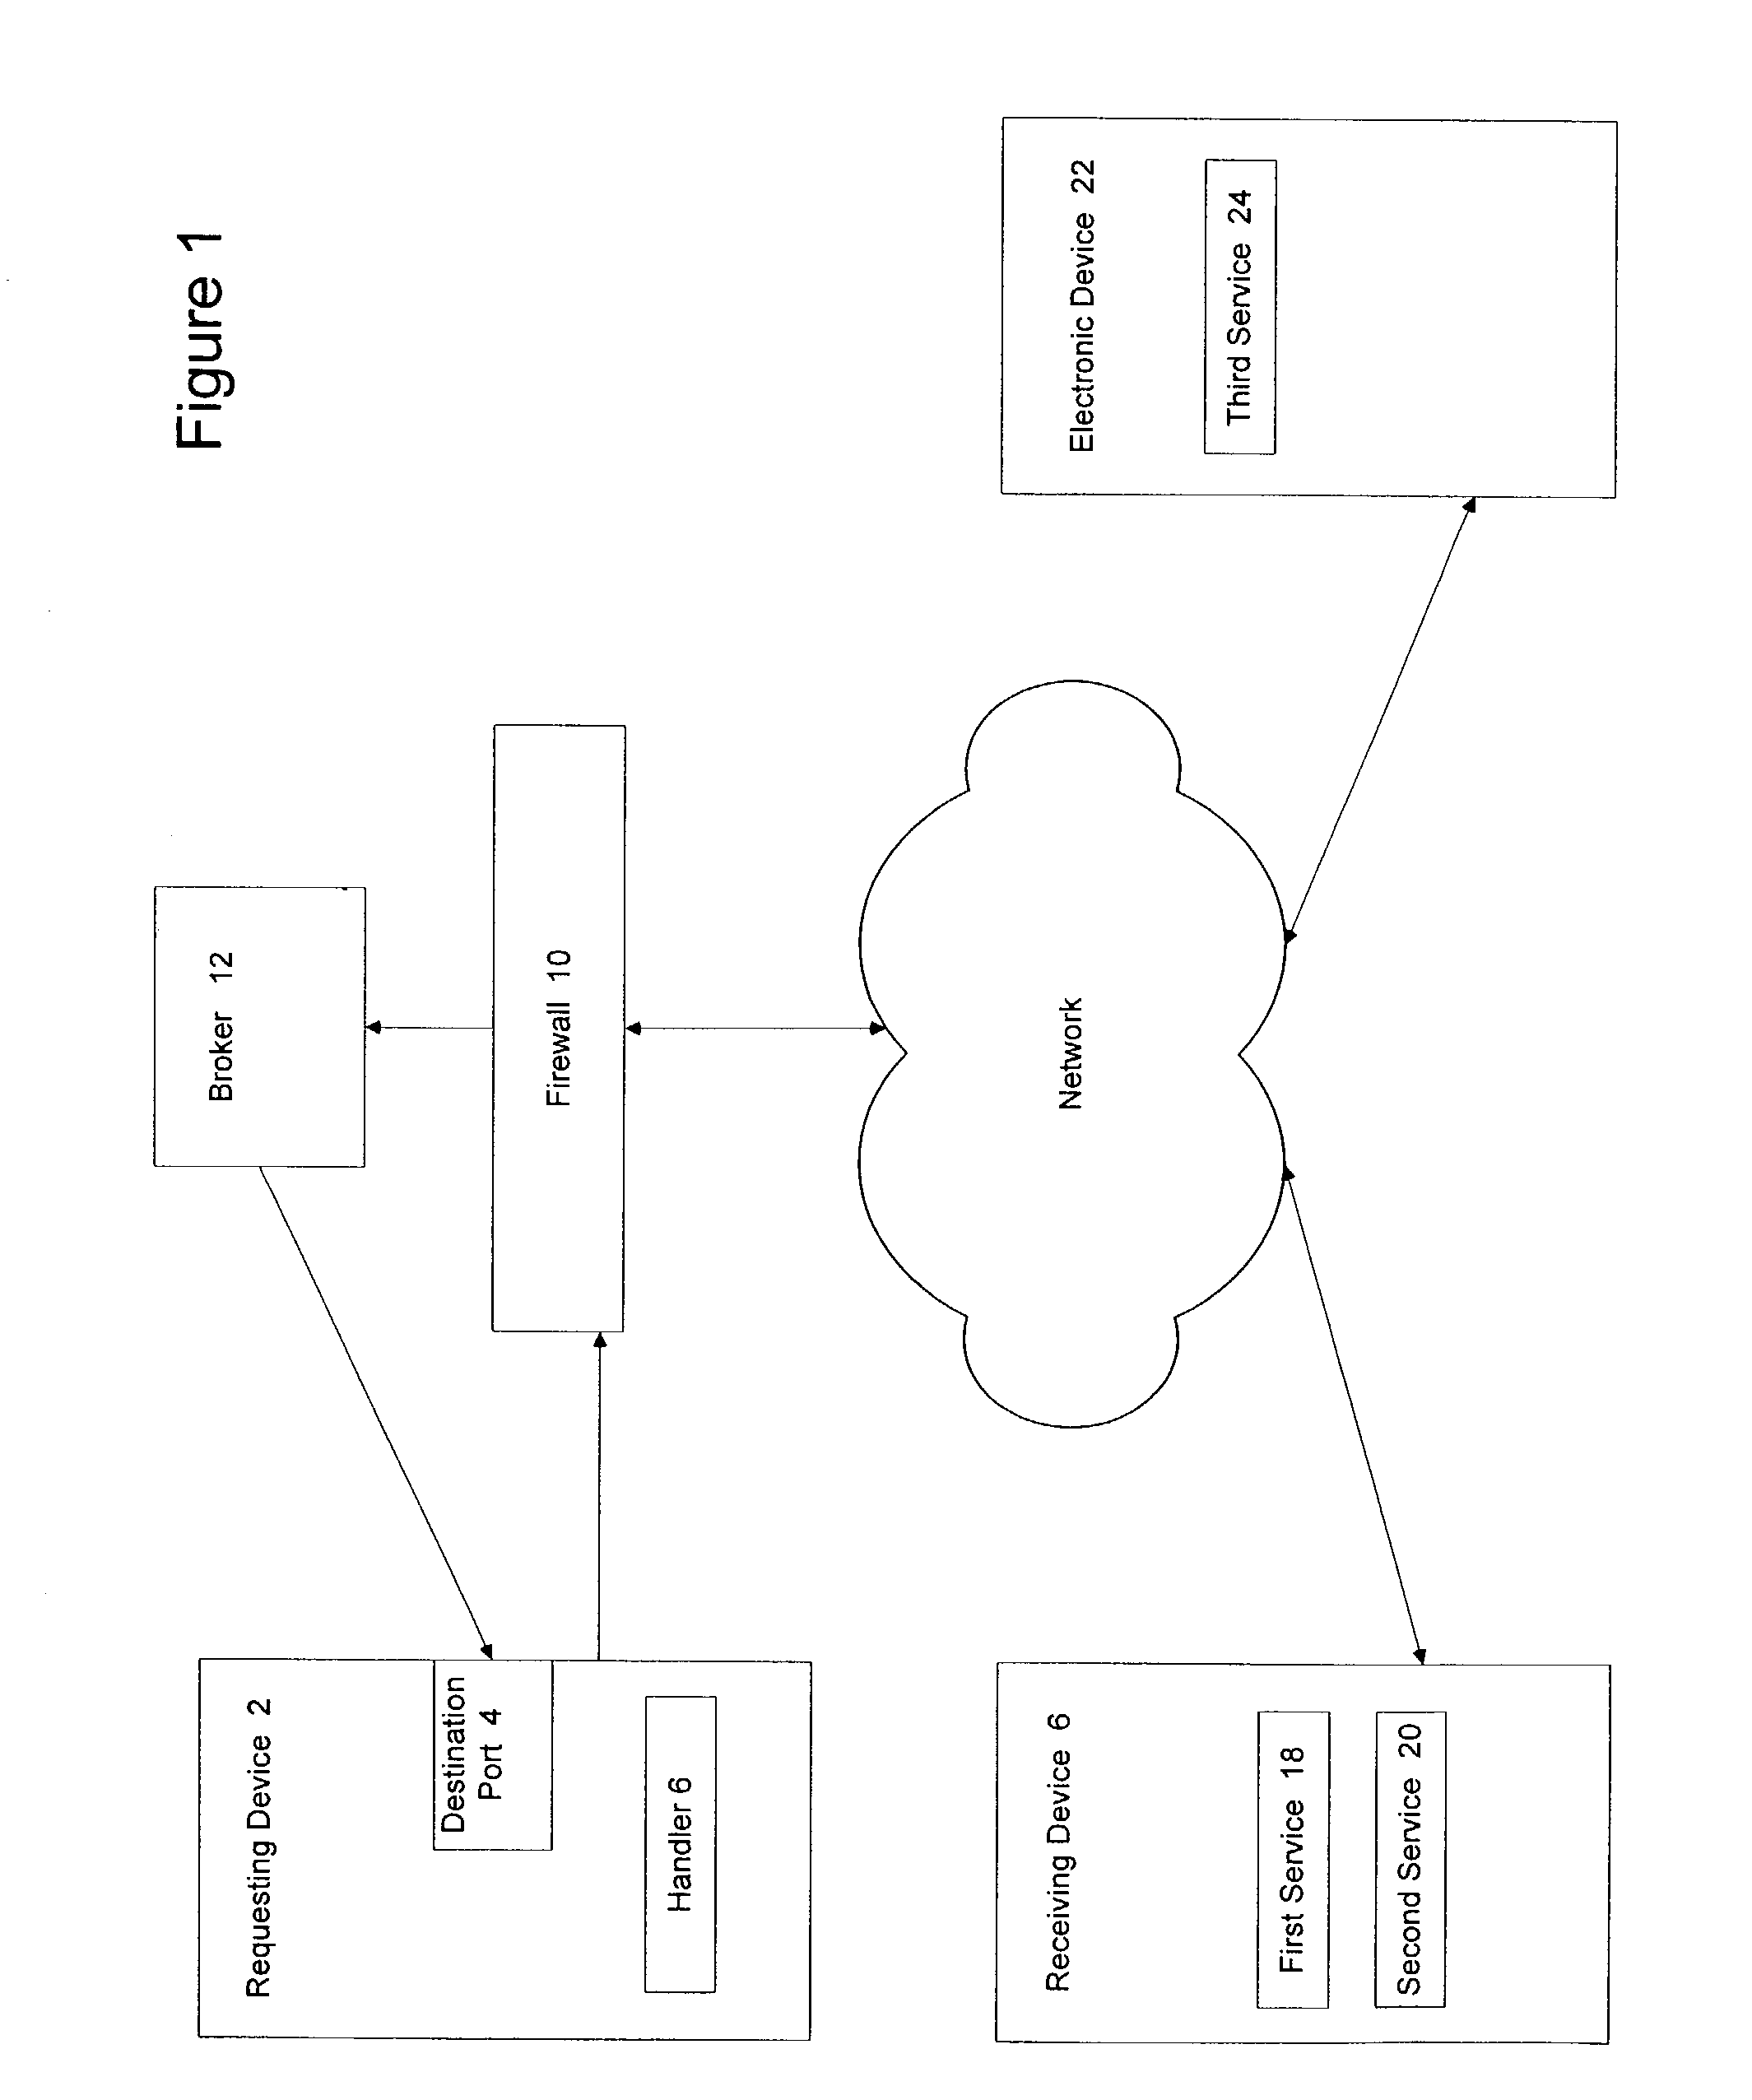 System and method for forward chaining web-based procedure calls